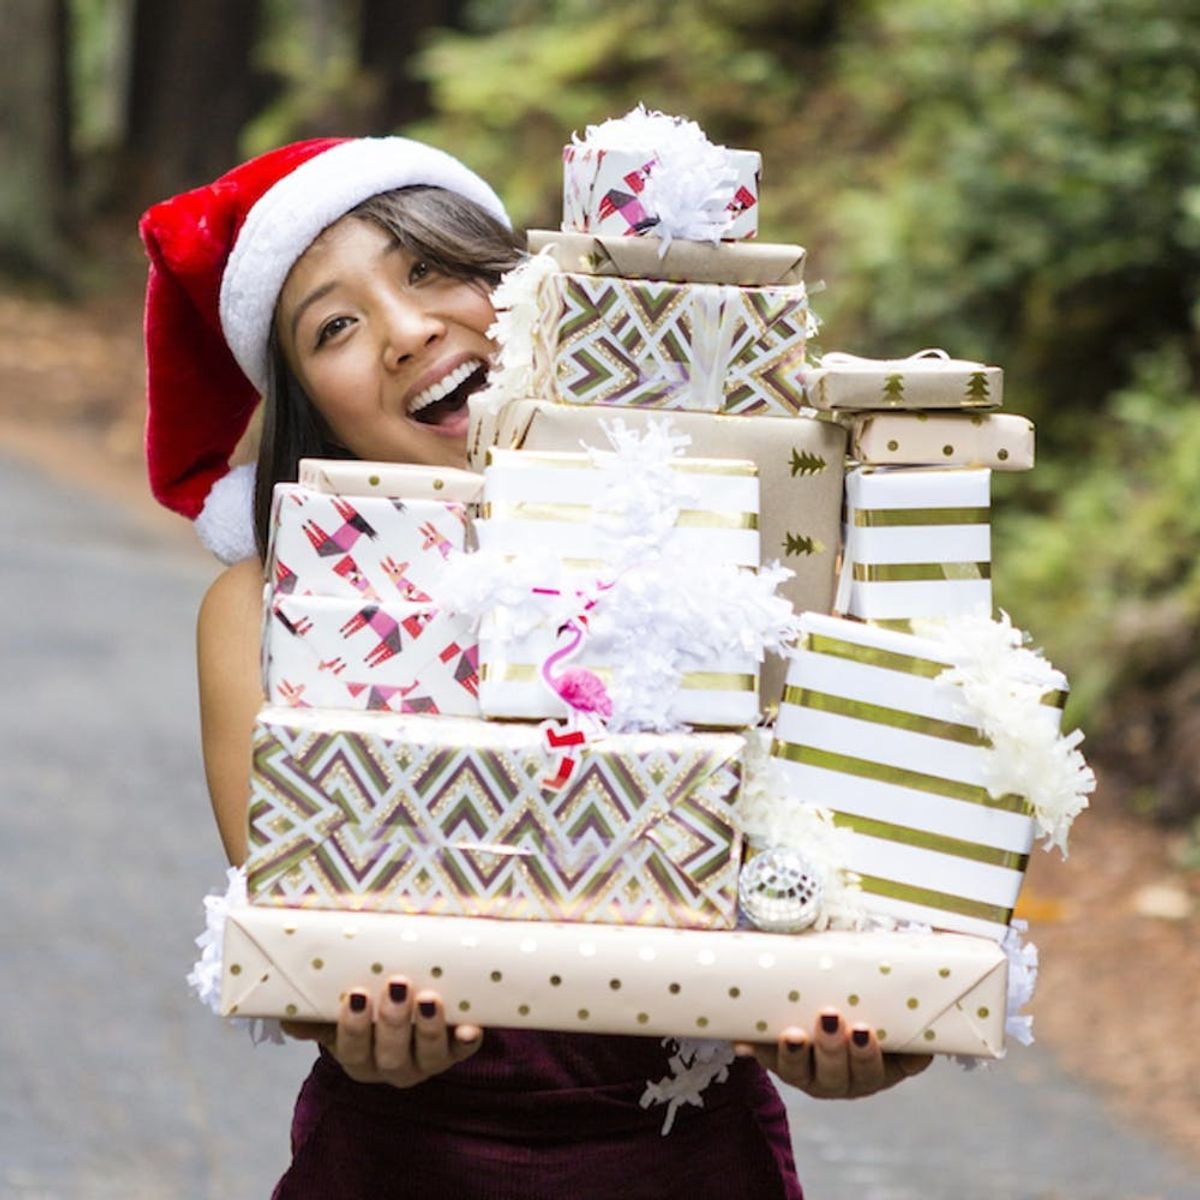 This Is How Women REALLY Shop for the Holidays, According to a New Survey